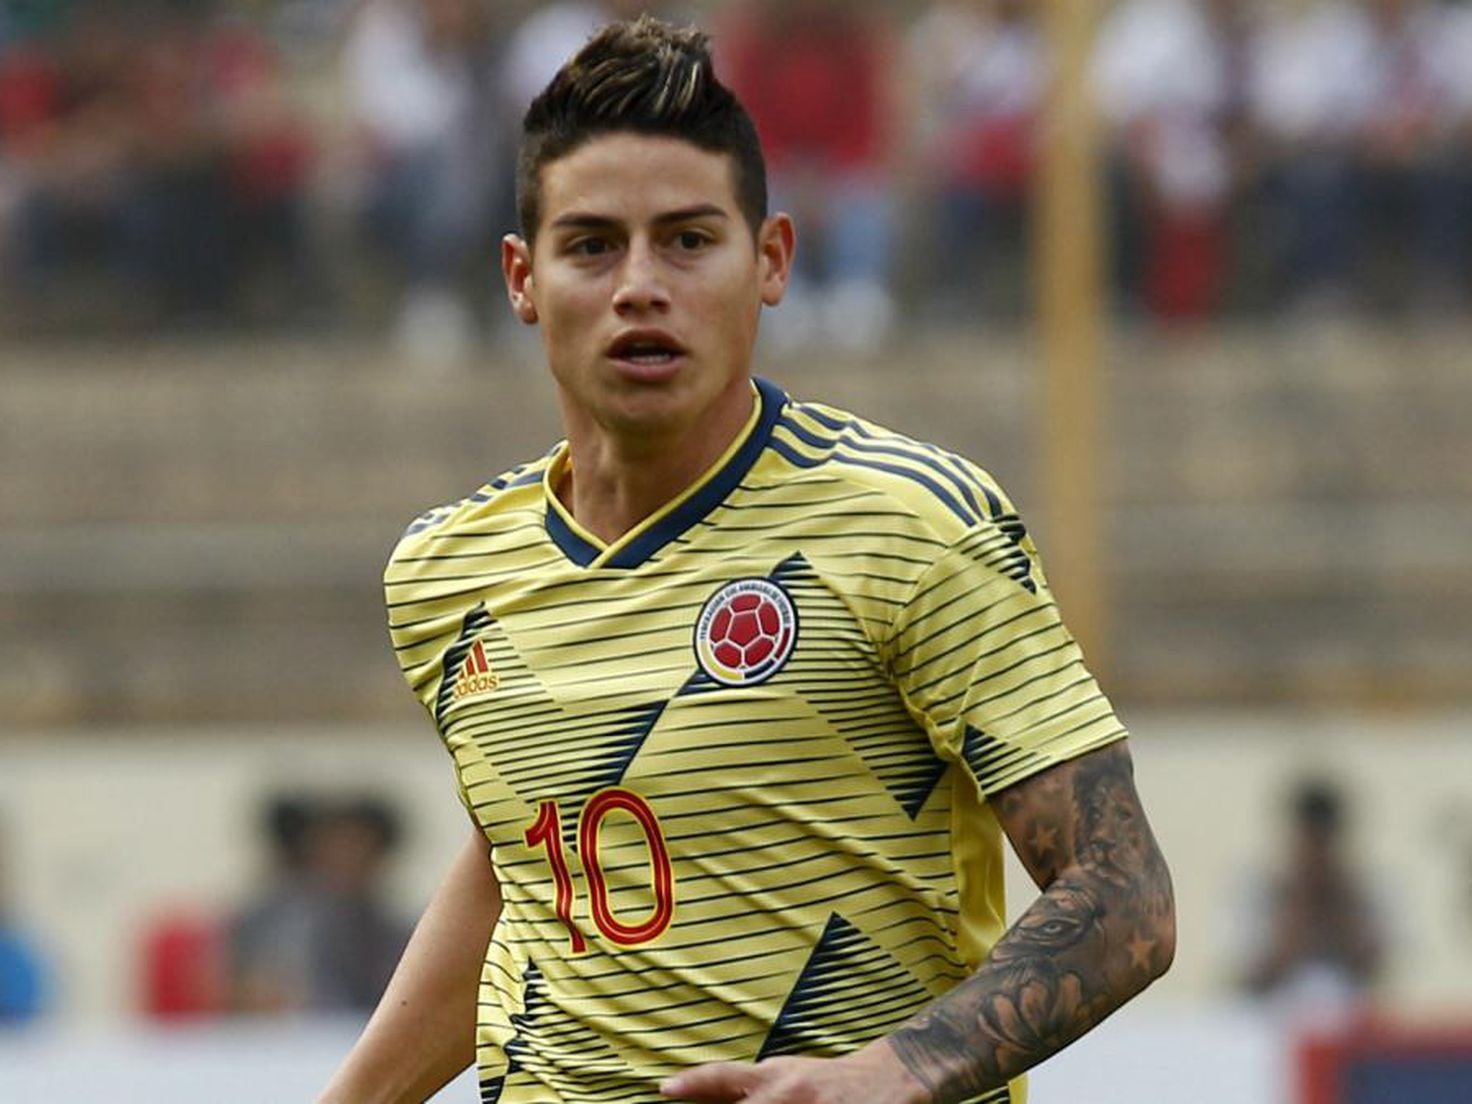 Autographed Colombia National Team Jersey | James Rodriguez #10